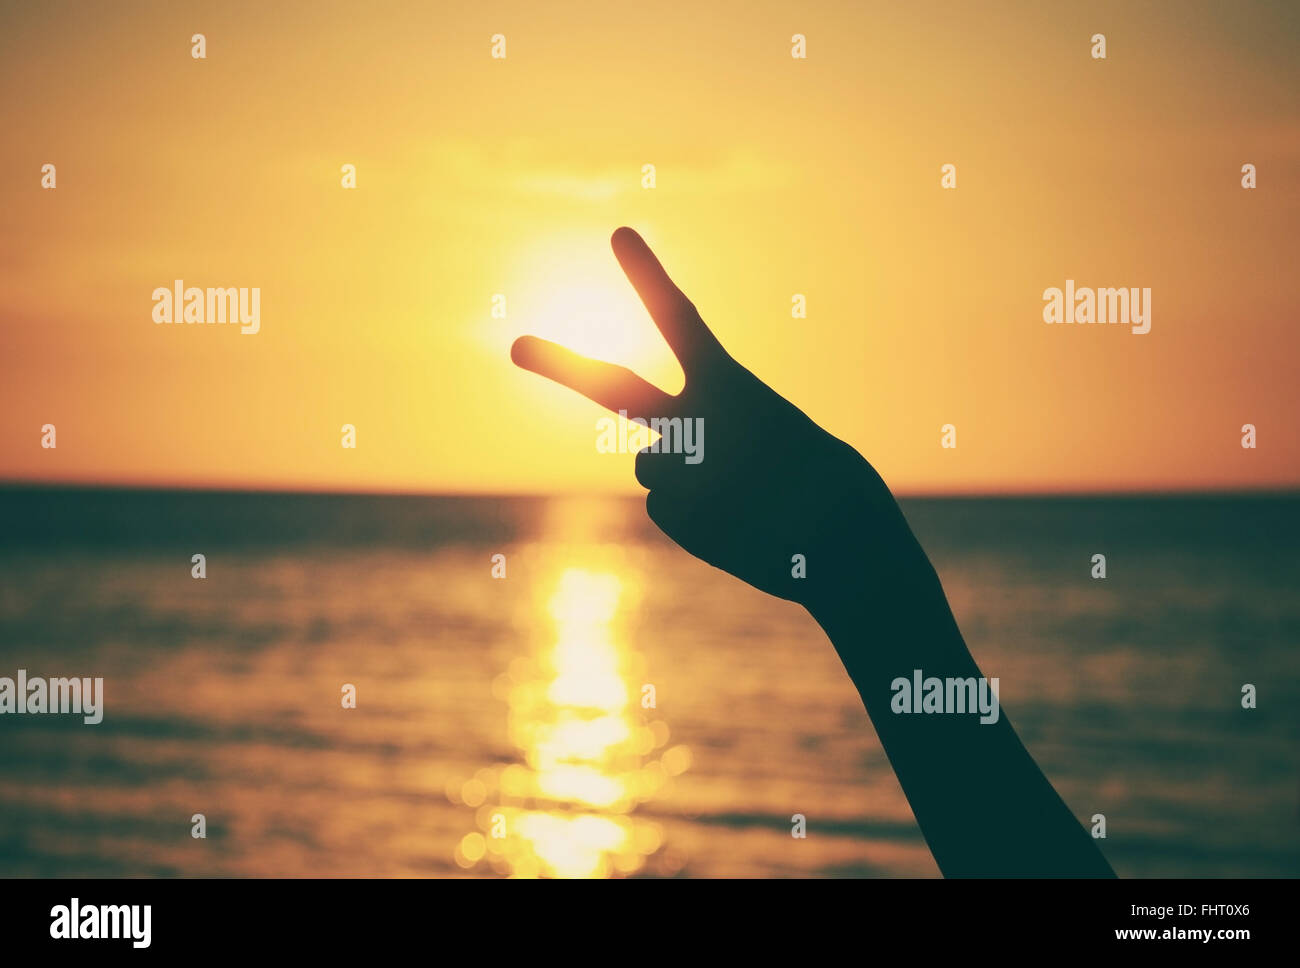 Silhouette of hand with victory sign with vintage and vignette effect Stock Photo